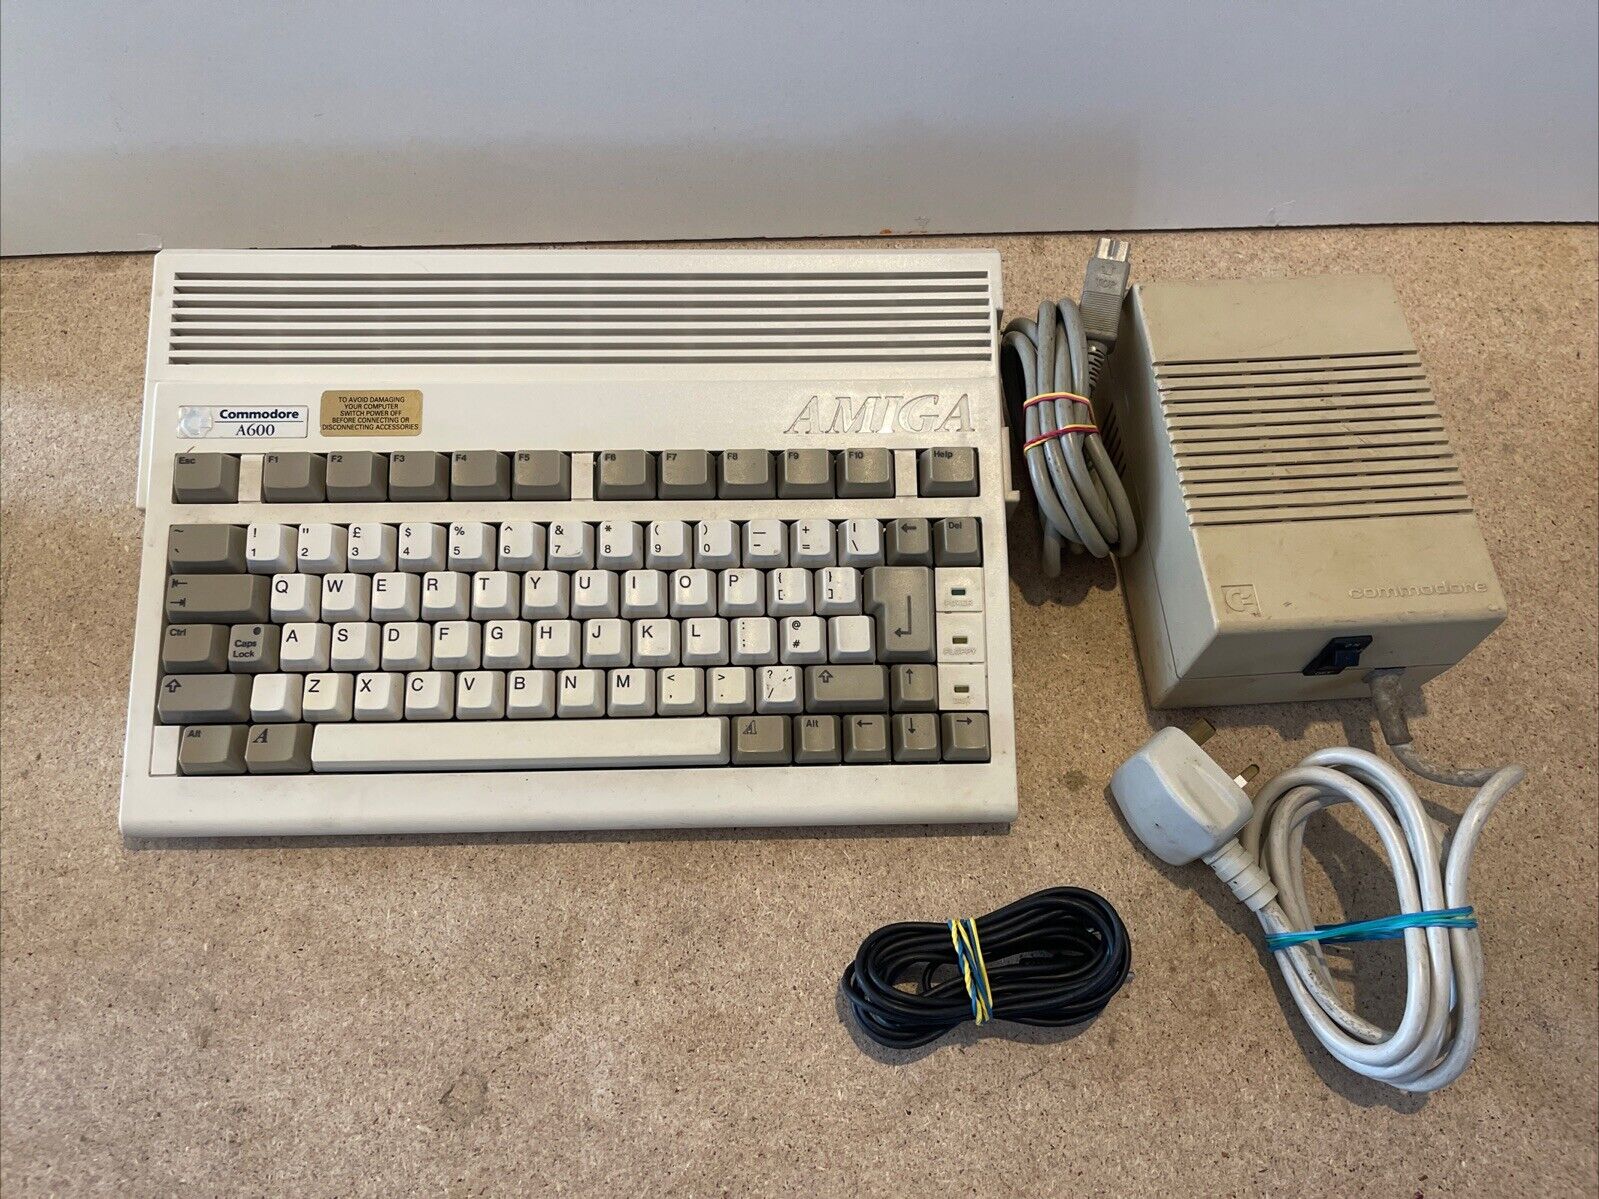 Vintage Commodore Amiga A600 Video Game Computer Working With Power Cable